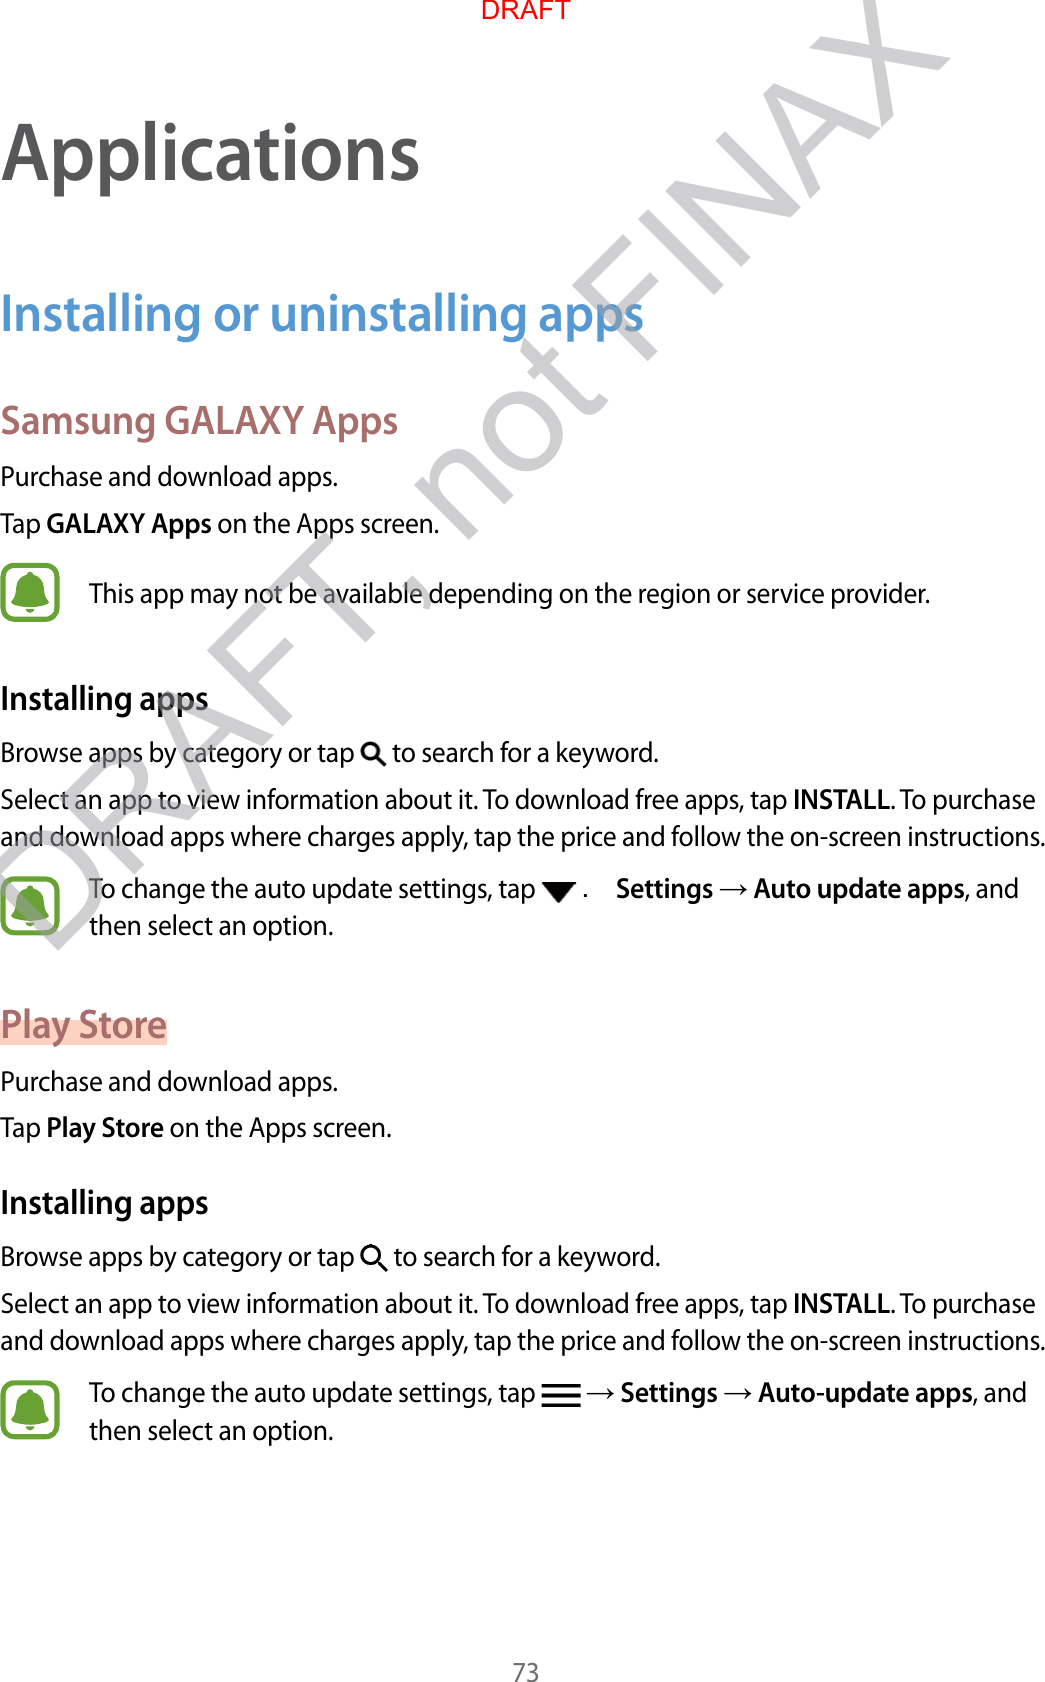 73ApplicationsInstalling or uninstalling appsSamsung GALAXY AppsPurchase and download apps.Tap GALAXY Apps on the Apps screen.This app may not be available depending on the region or service provider.Installing appsBrowse apps by category or tap   to search for a keyword.Select an app to view information about it. To download free apps, tap INSTALL. To purchase and download apps where charges apply, tap the price and follow the on-screen instructions.To change the auto update settings, tap   . Settings  Auto update apps, and then select an option.Play StorePurchase and download apps.Tap Play Store on the Apps screen.Installing appsBrowse apps by category or tap   to search for a keyword.Select an app to view information about it. To download free apps, tap INSTALL. To purchase and download apps where charges apply, tap the price and follow the on-screen instructions.To change the auto update settings, tap    Settings  Auto-update apps, and then select an option.DRAFTDRAFT, not FINAX